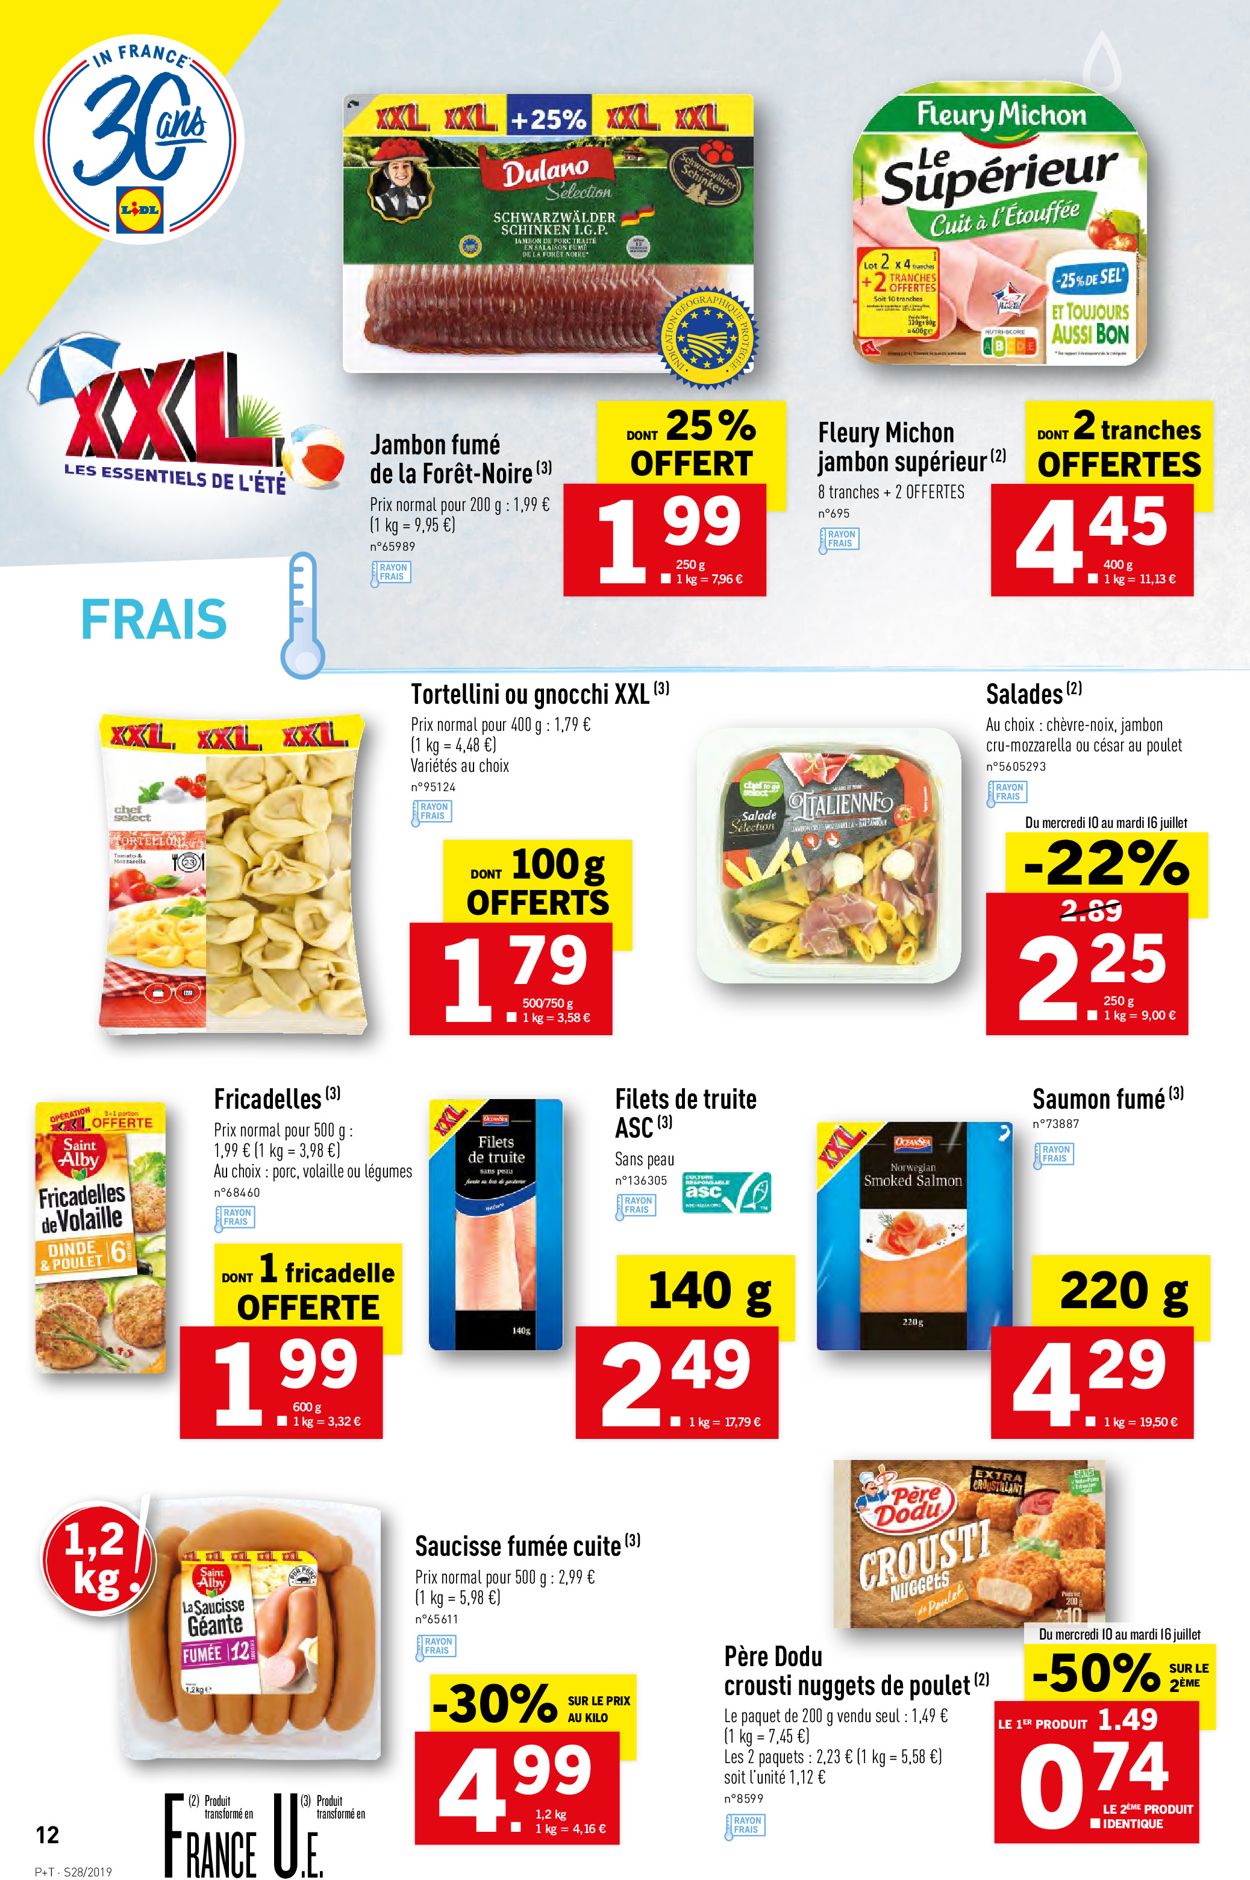 Lidl Catalogue - 10.07-16.07.2019 (Page 12)